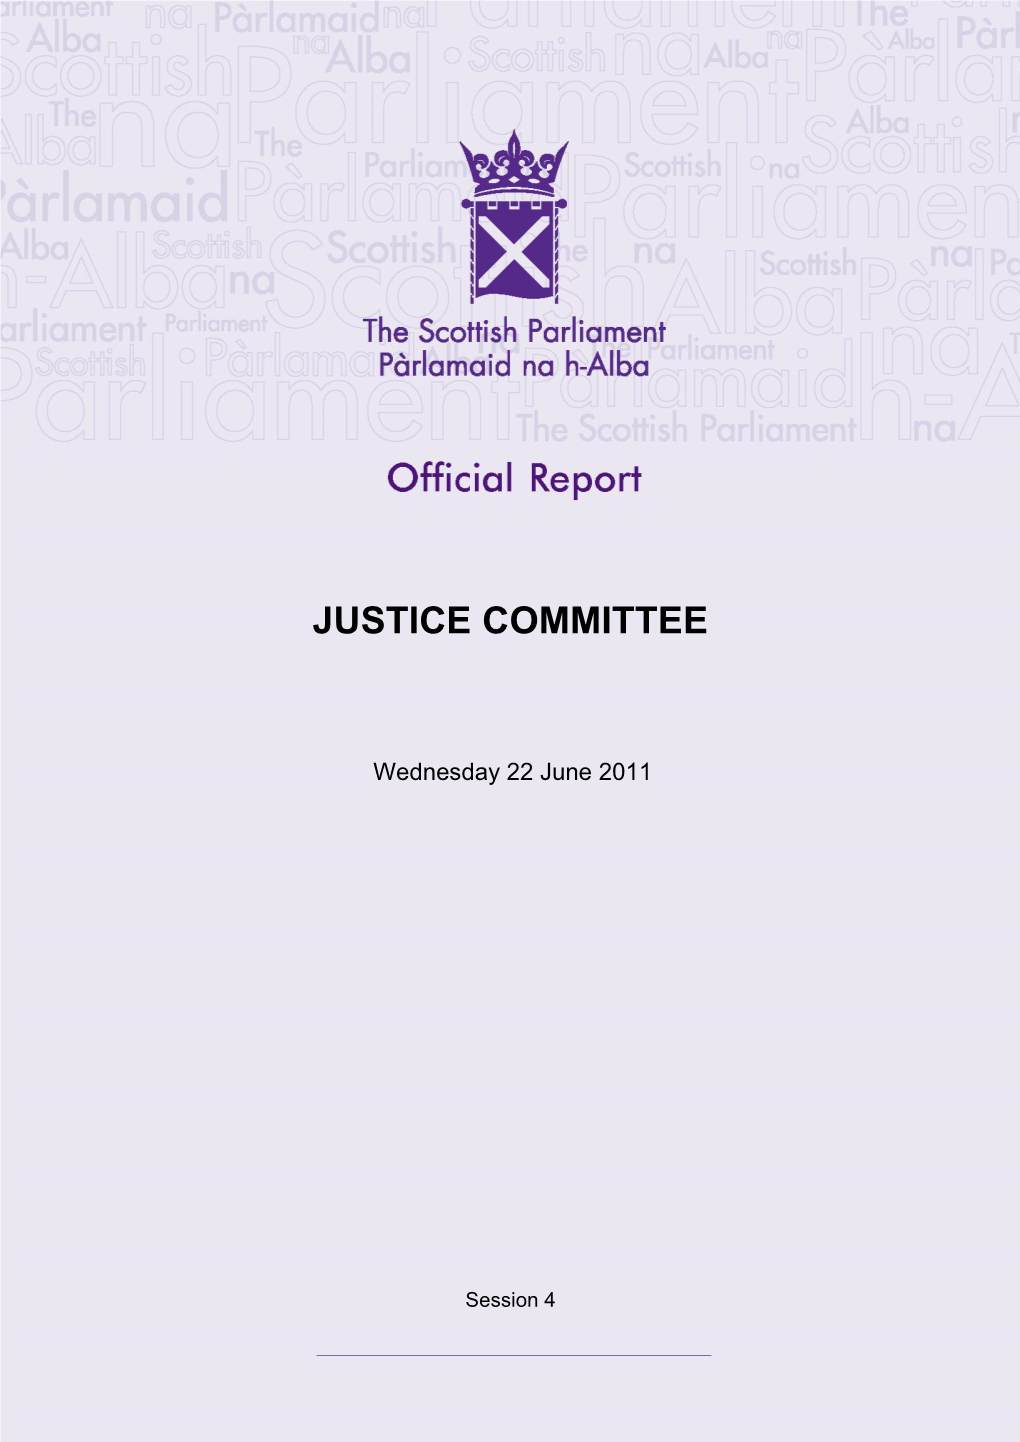 Official Report, for Getting the the Lord Advocate: Yes